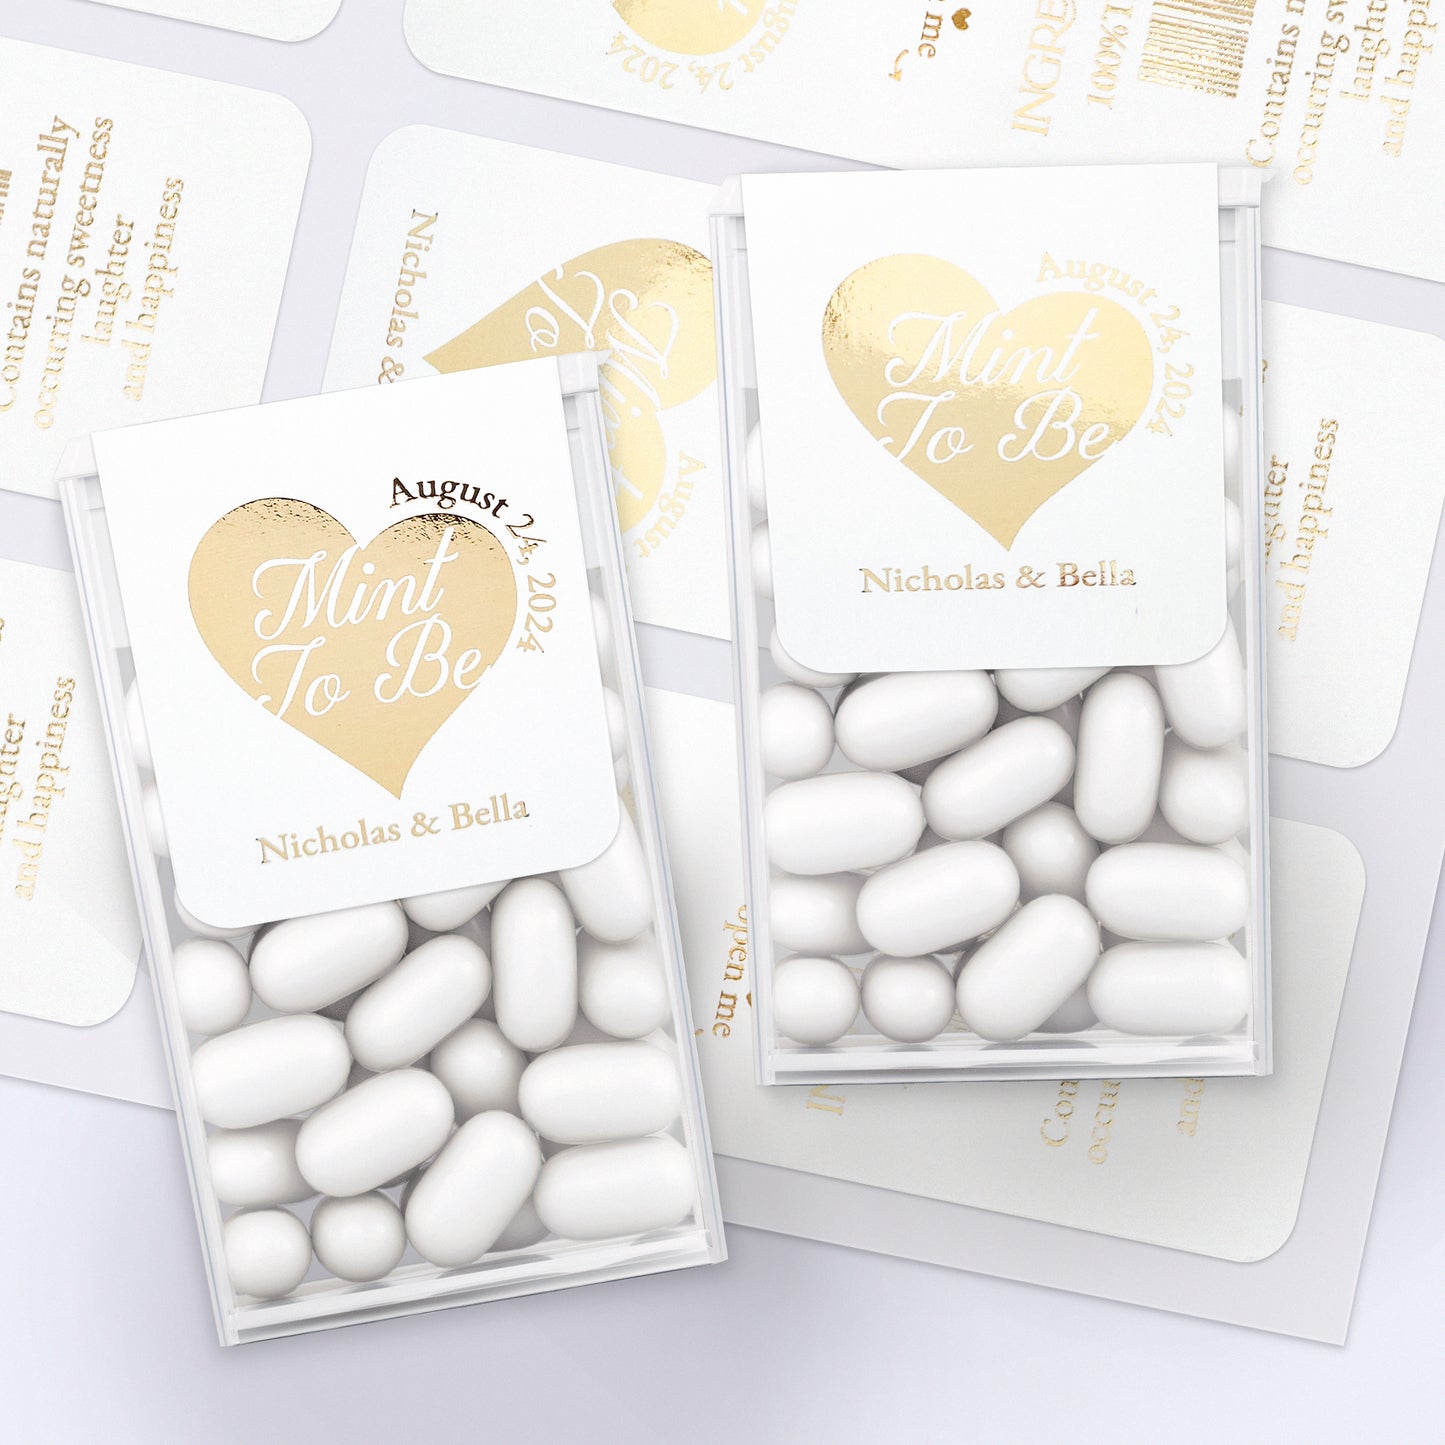 Stylish Mint to Be Tic Tac stickers in gold, rose gold, or silver foil with personalized couple names or wedding date, perfect for wedding favors and gift bags - XOXOKristen